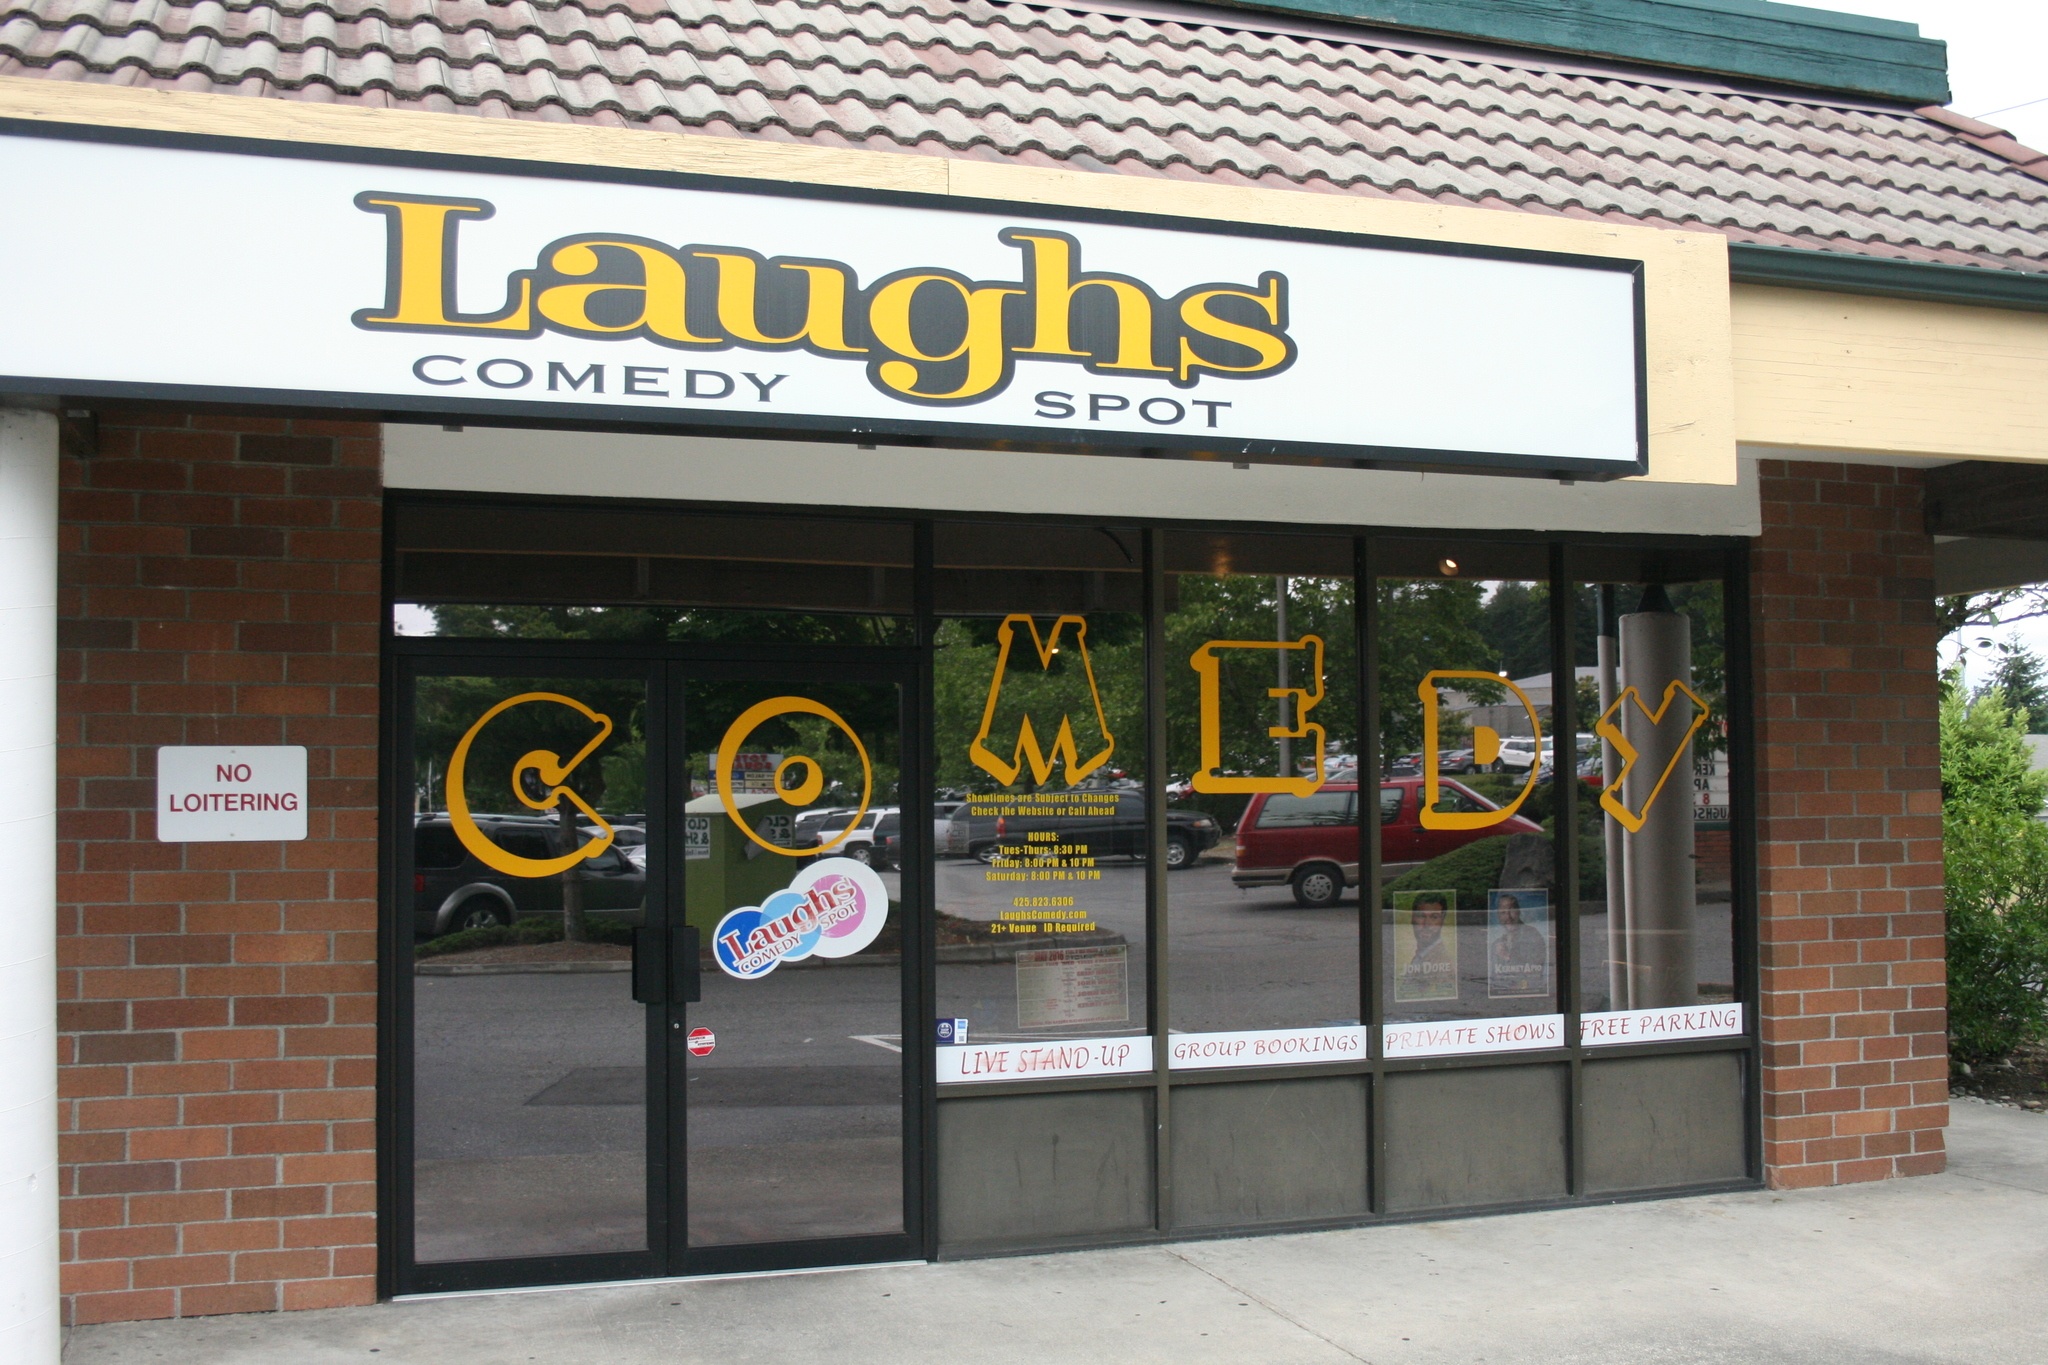 Laughs Comedy Spot has been a local favorite since it opened in 2007